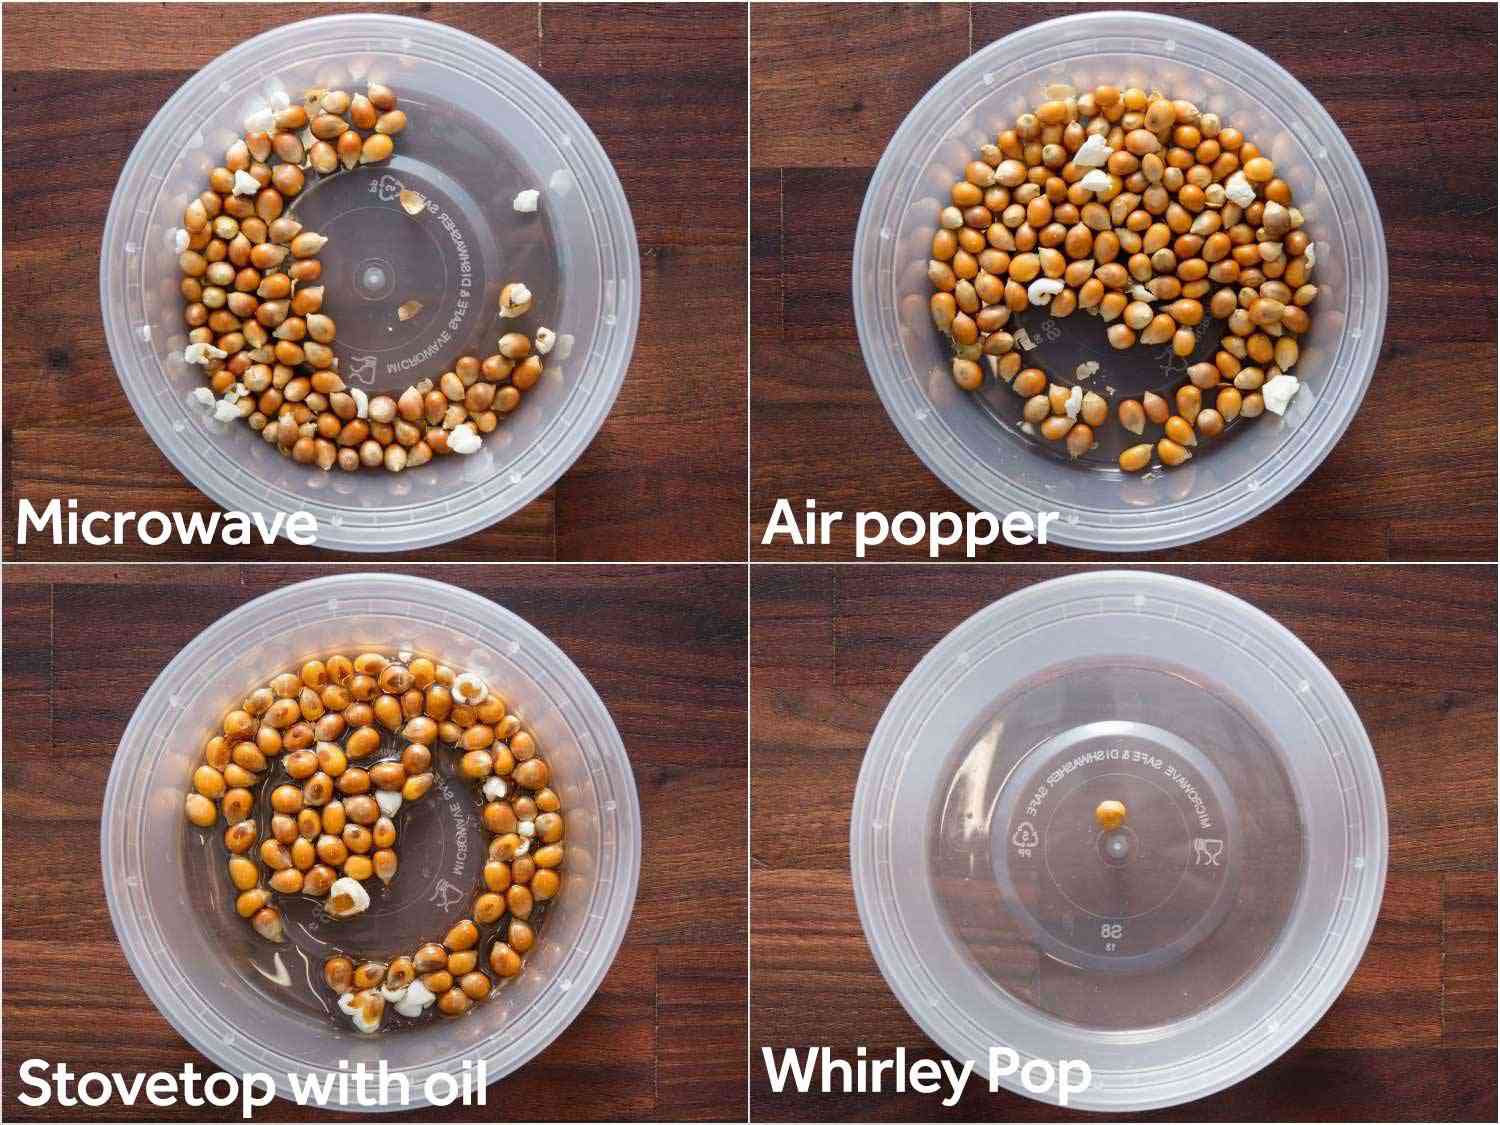 Close up of un-popped kernels left behind from each method of popping corn, microwave vs stovetop vs oil-popped vs Whirley Pop